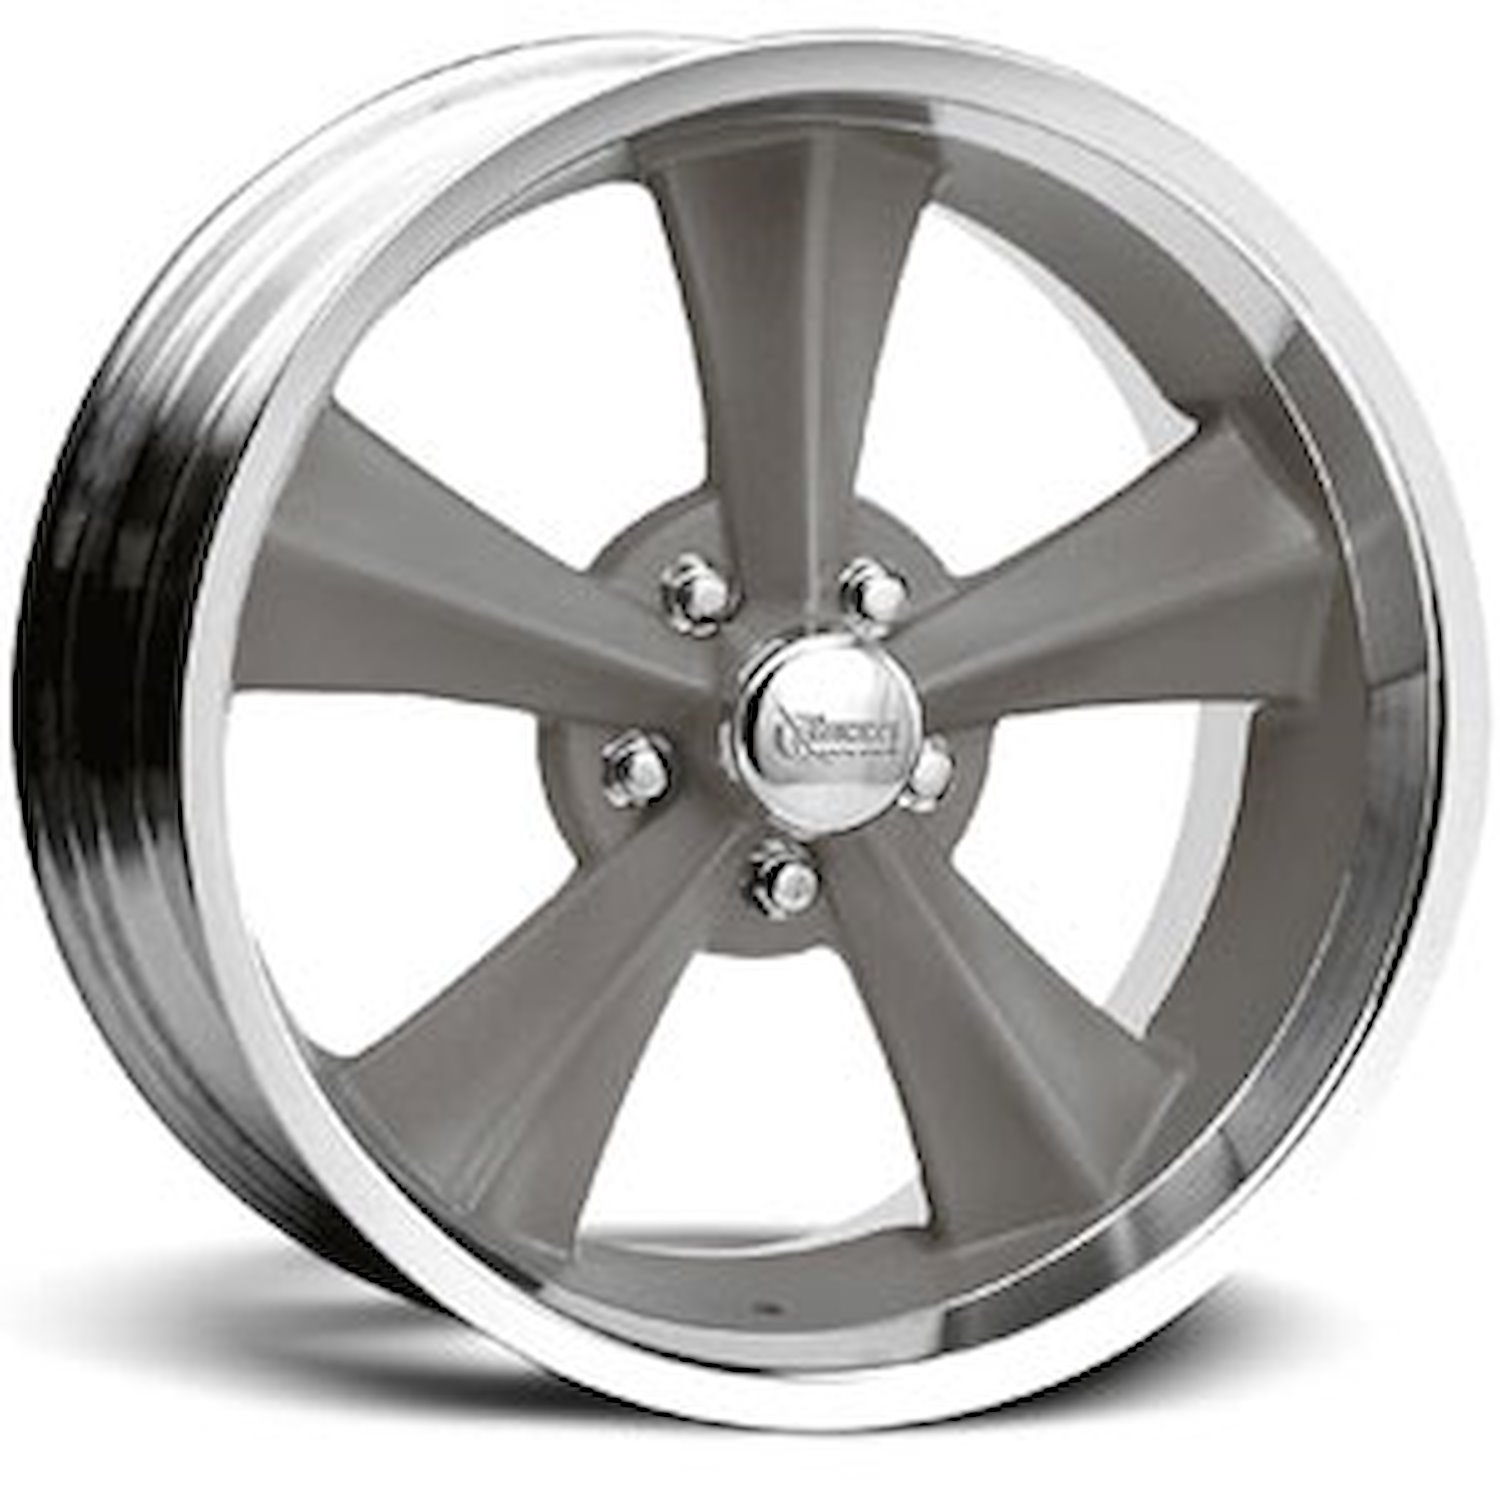 Booster Wheel - Gray Size: 20" x 8.5"